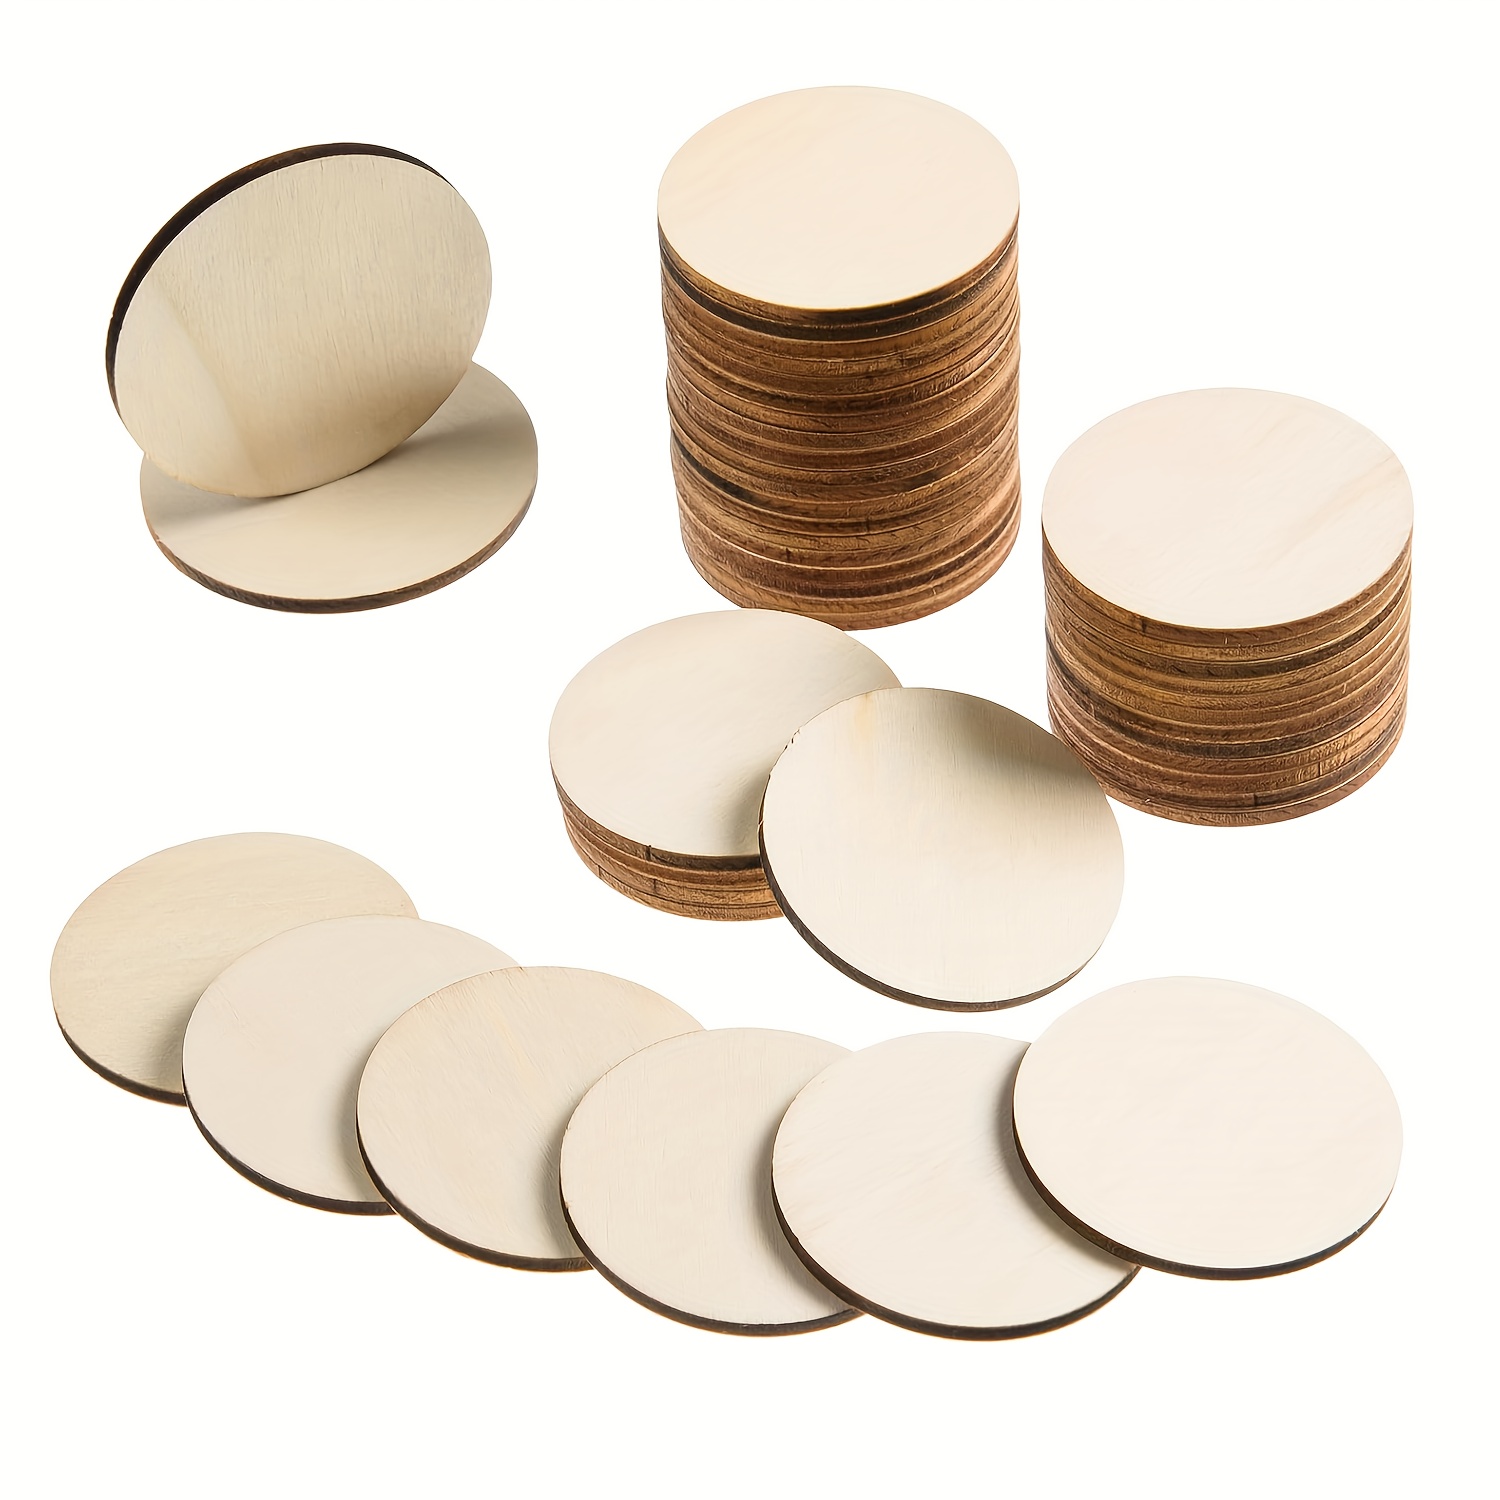 Tofficu 15pcs Round Bamboo Circle Wooden Tags Wooden Craft Shapes Wood  Round Circle Slices Unfinished Round Discs Unfinished Wooden Slice Rustic  Wood